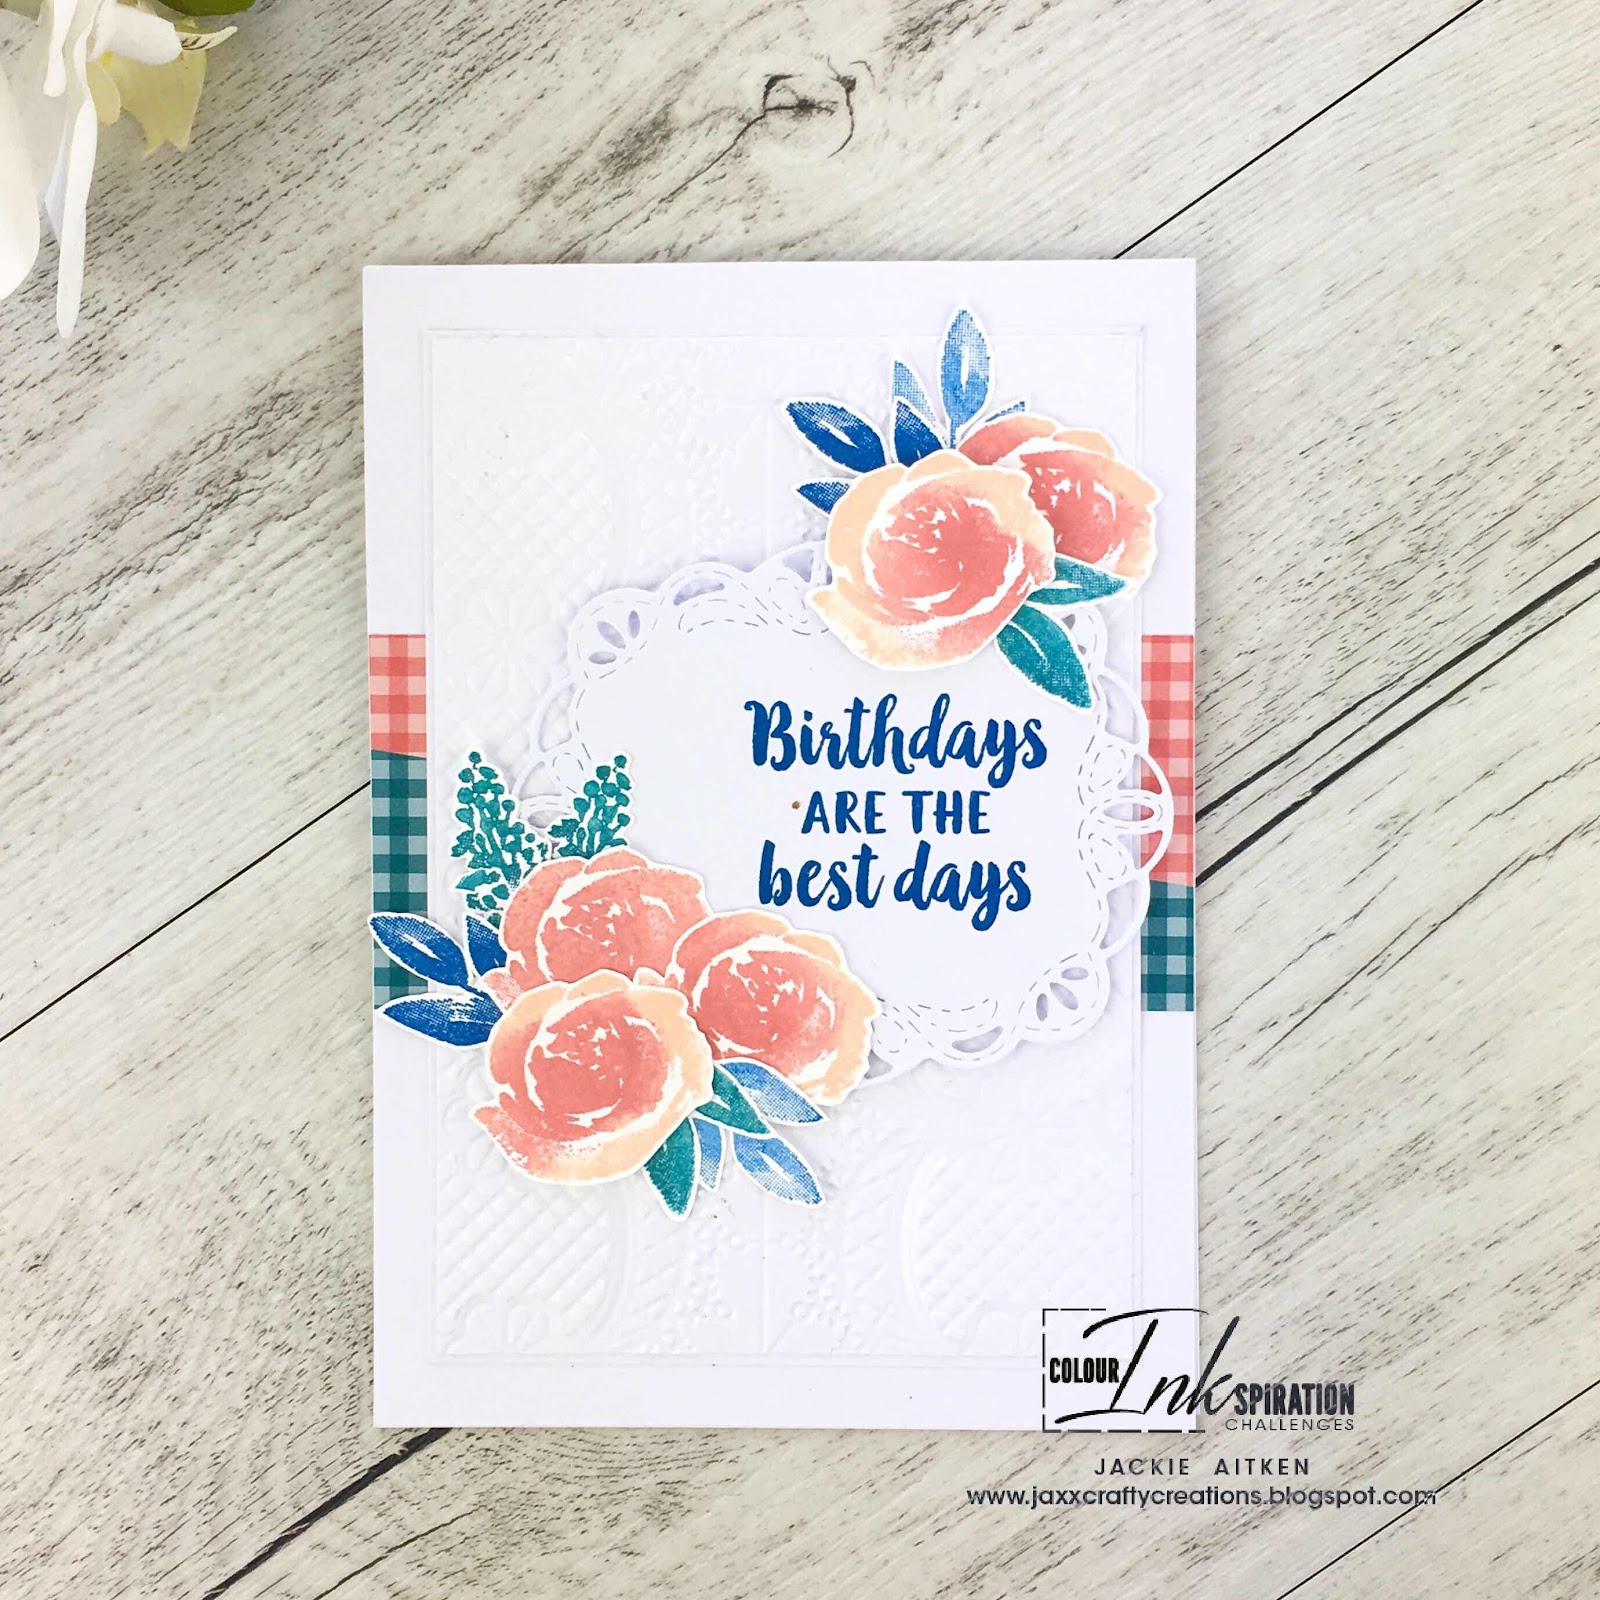 Jaxx Crafty Creations, Beautiful Friendship, 2019-2021 In Colours, Colour INKspiration Blog Challenge, Floral Card, 